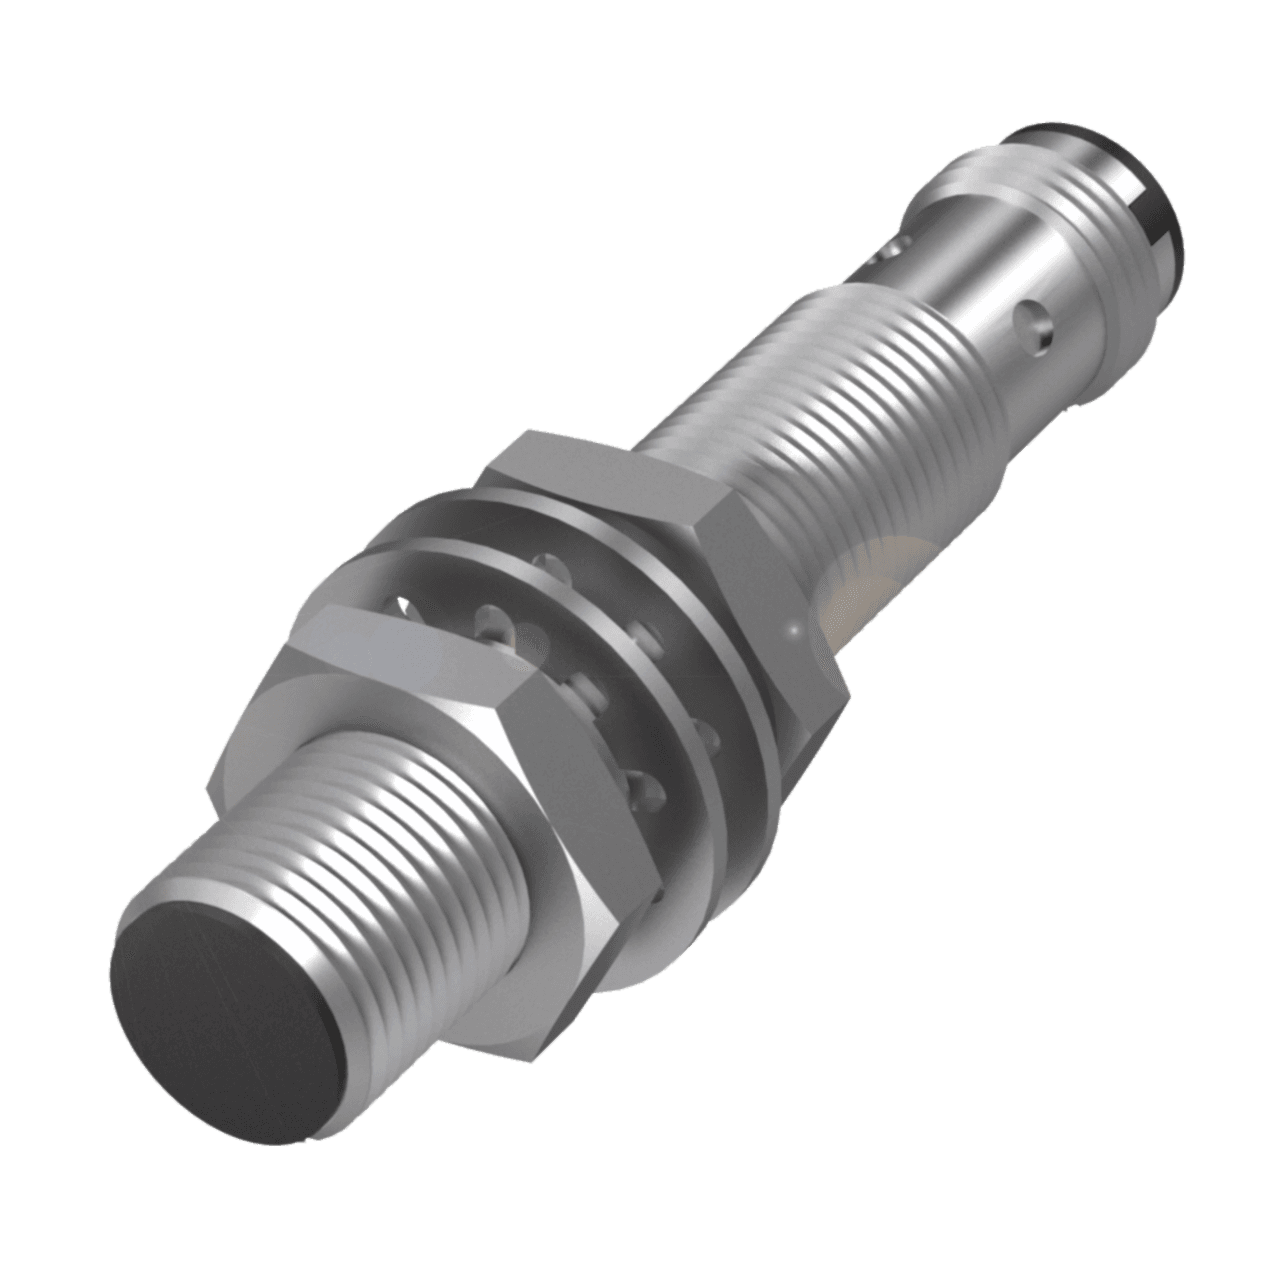 Balluff BES0068 Inductive standard sensors with preferred type, Dimension: Ø 12 x 65 mm, Style: M12x1, Installation: for flush mounting, Range: 4 mm, Switching output: PNP Normally open (NO), Switching frequency: 2500 Hz, Housing material: Brass, Nickel-free coated